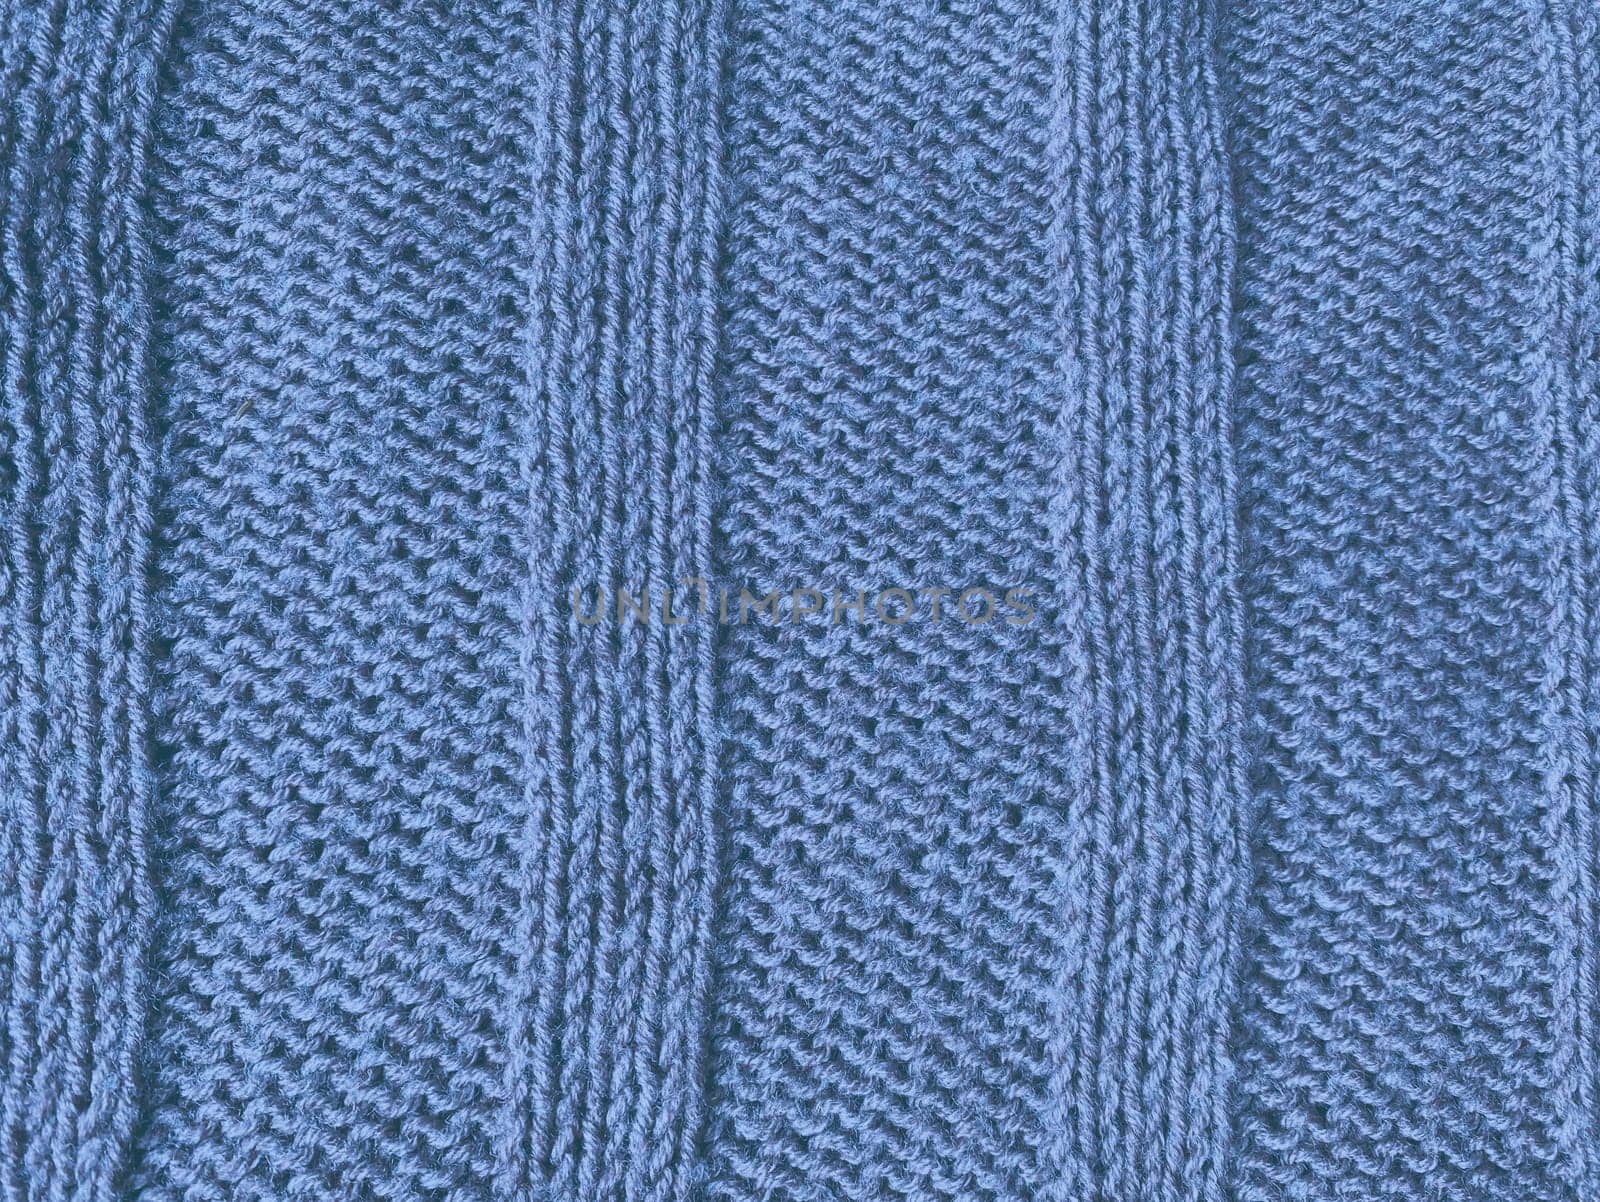 Weave Knitted Blanket. Organic Wool Design. Knitwear Holiday Background. Detail Knitted Blanket. Blue Macro Thread. Nordic Xmas Carpet. Soft Yarn Embroidery. Knitted Sweater.